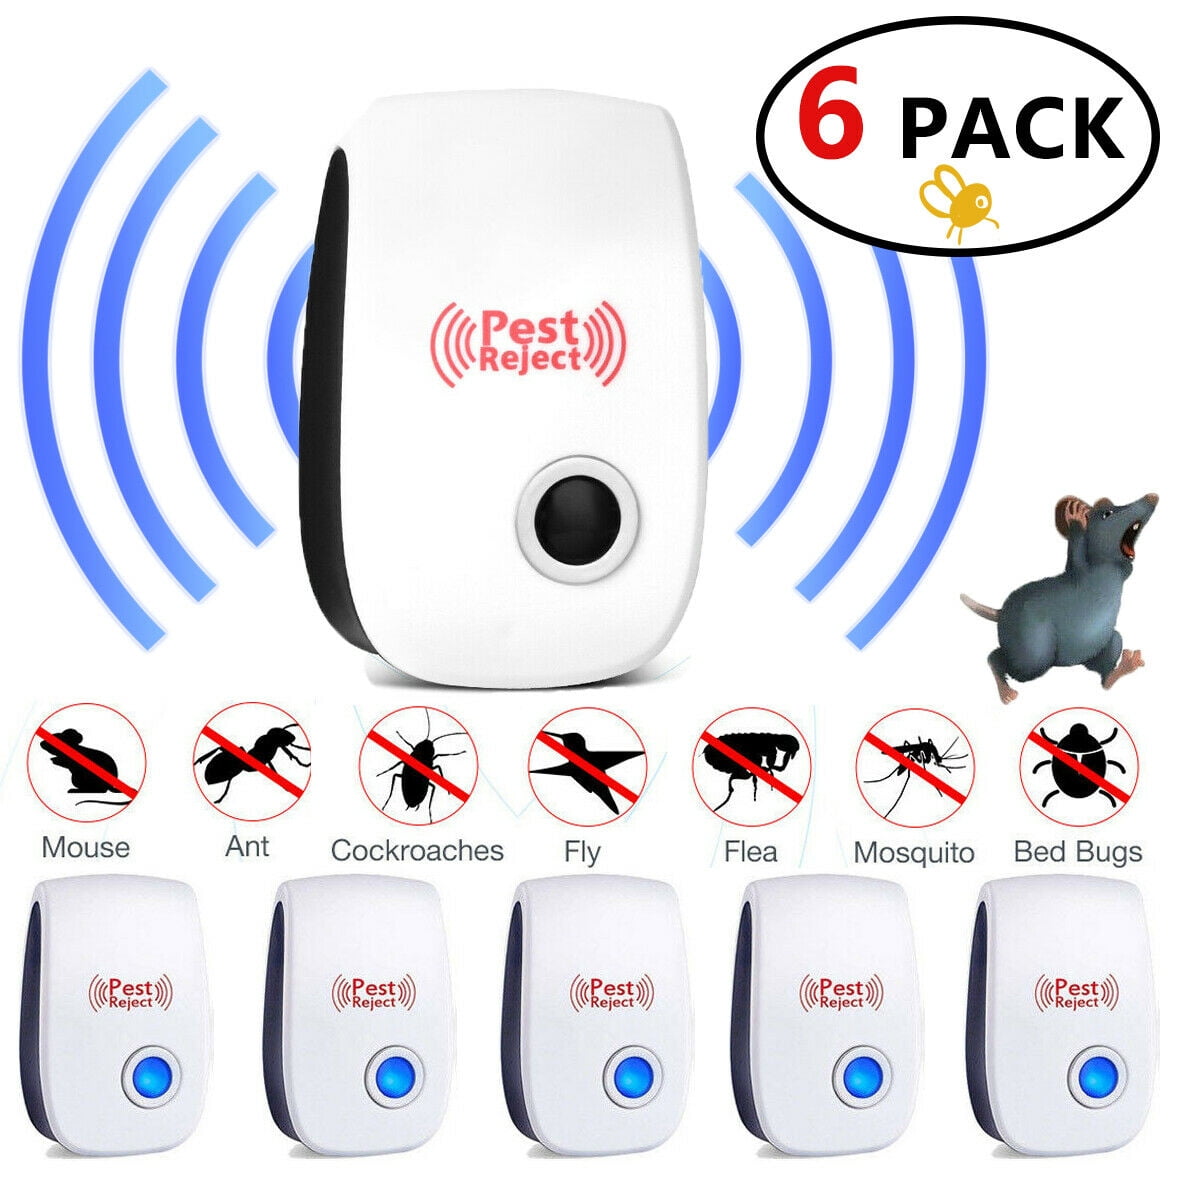 4pcs Ultrasonic Electronic Pest Reject Répulsif Anti Mosquito Bug Insect Killer 